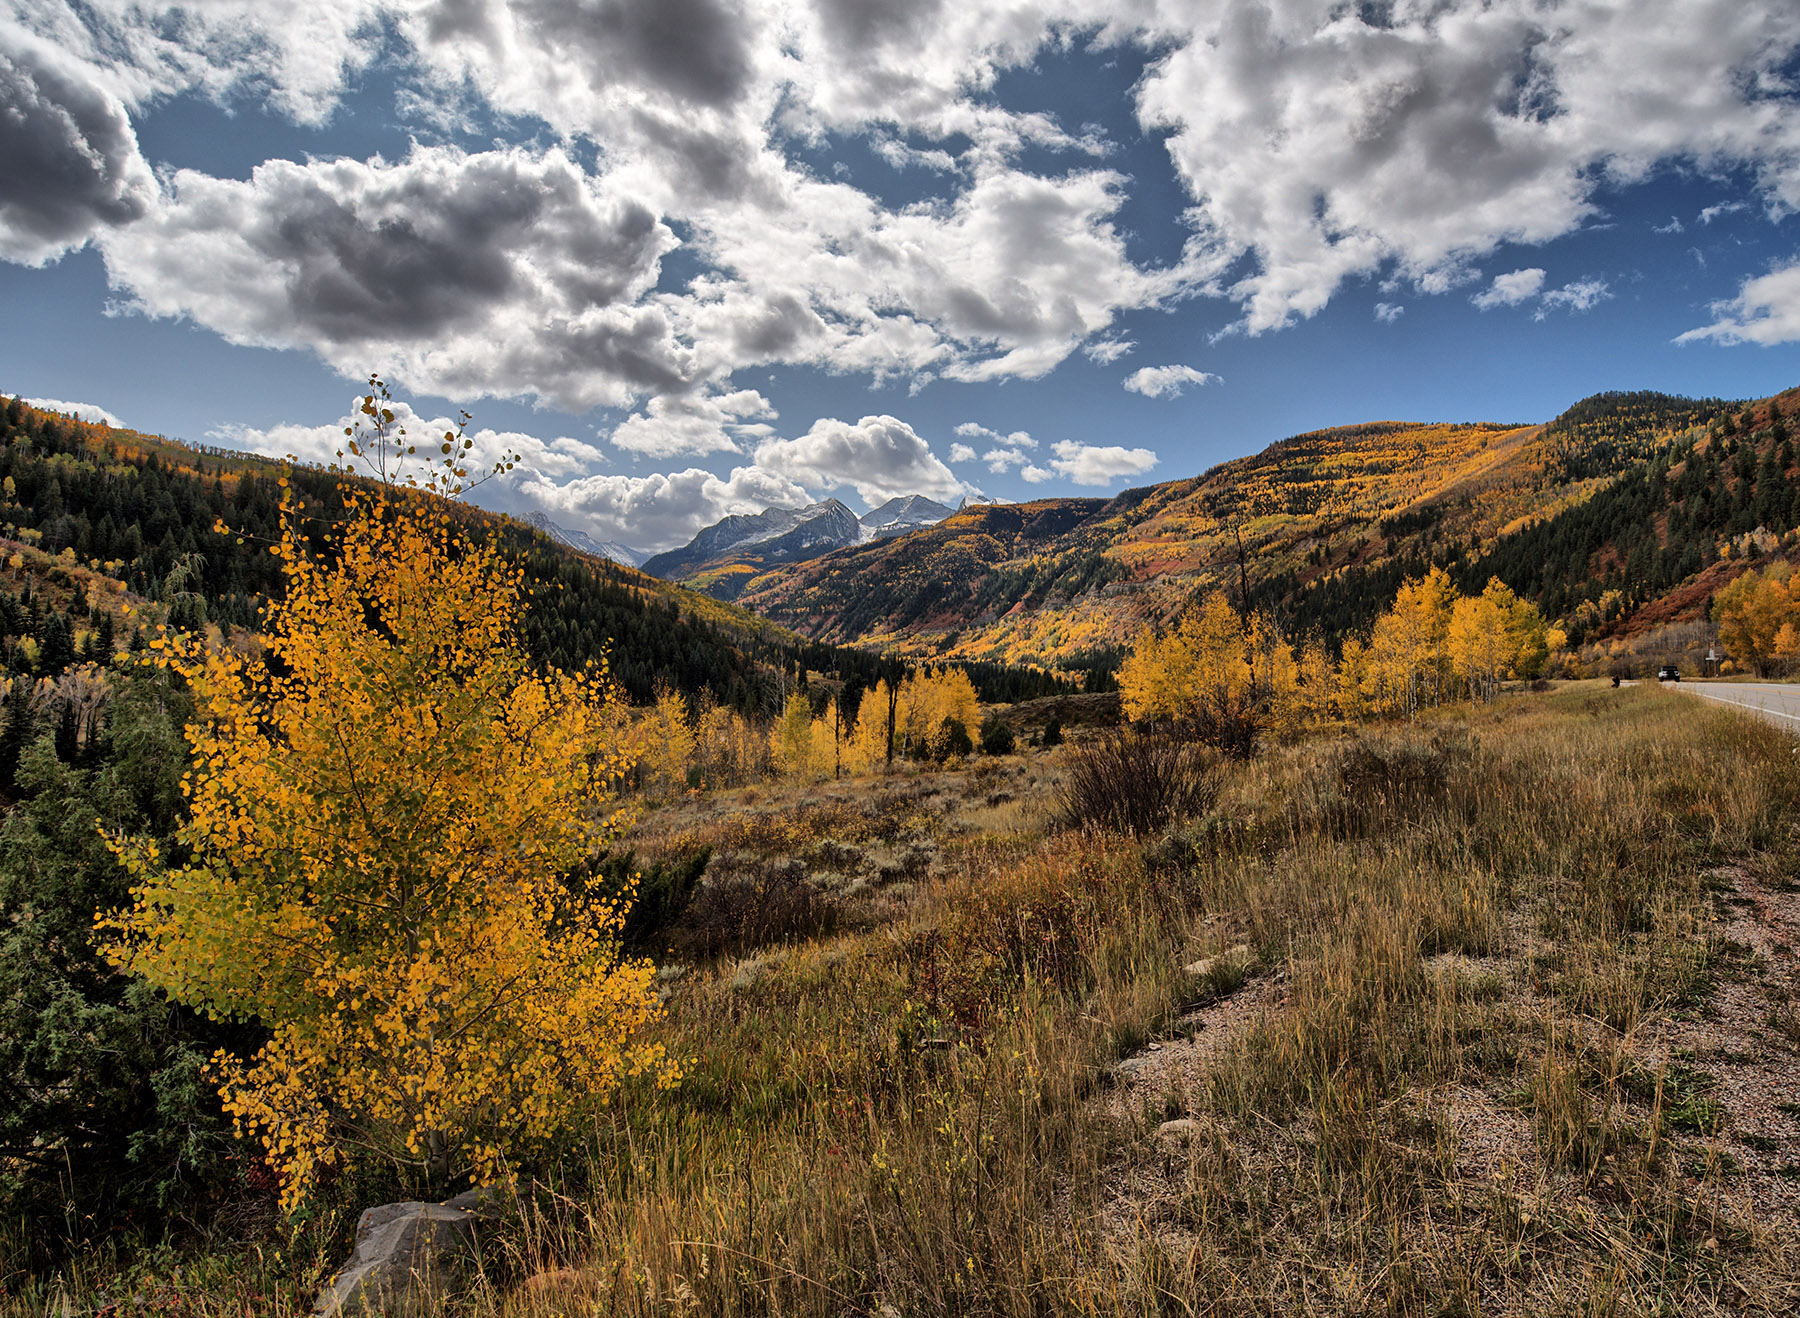 View of Fall colors on Highway 133 heading towards McClure Pass.